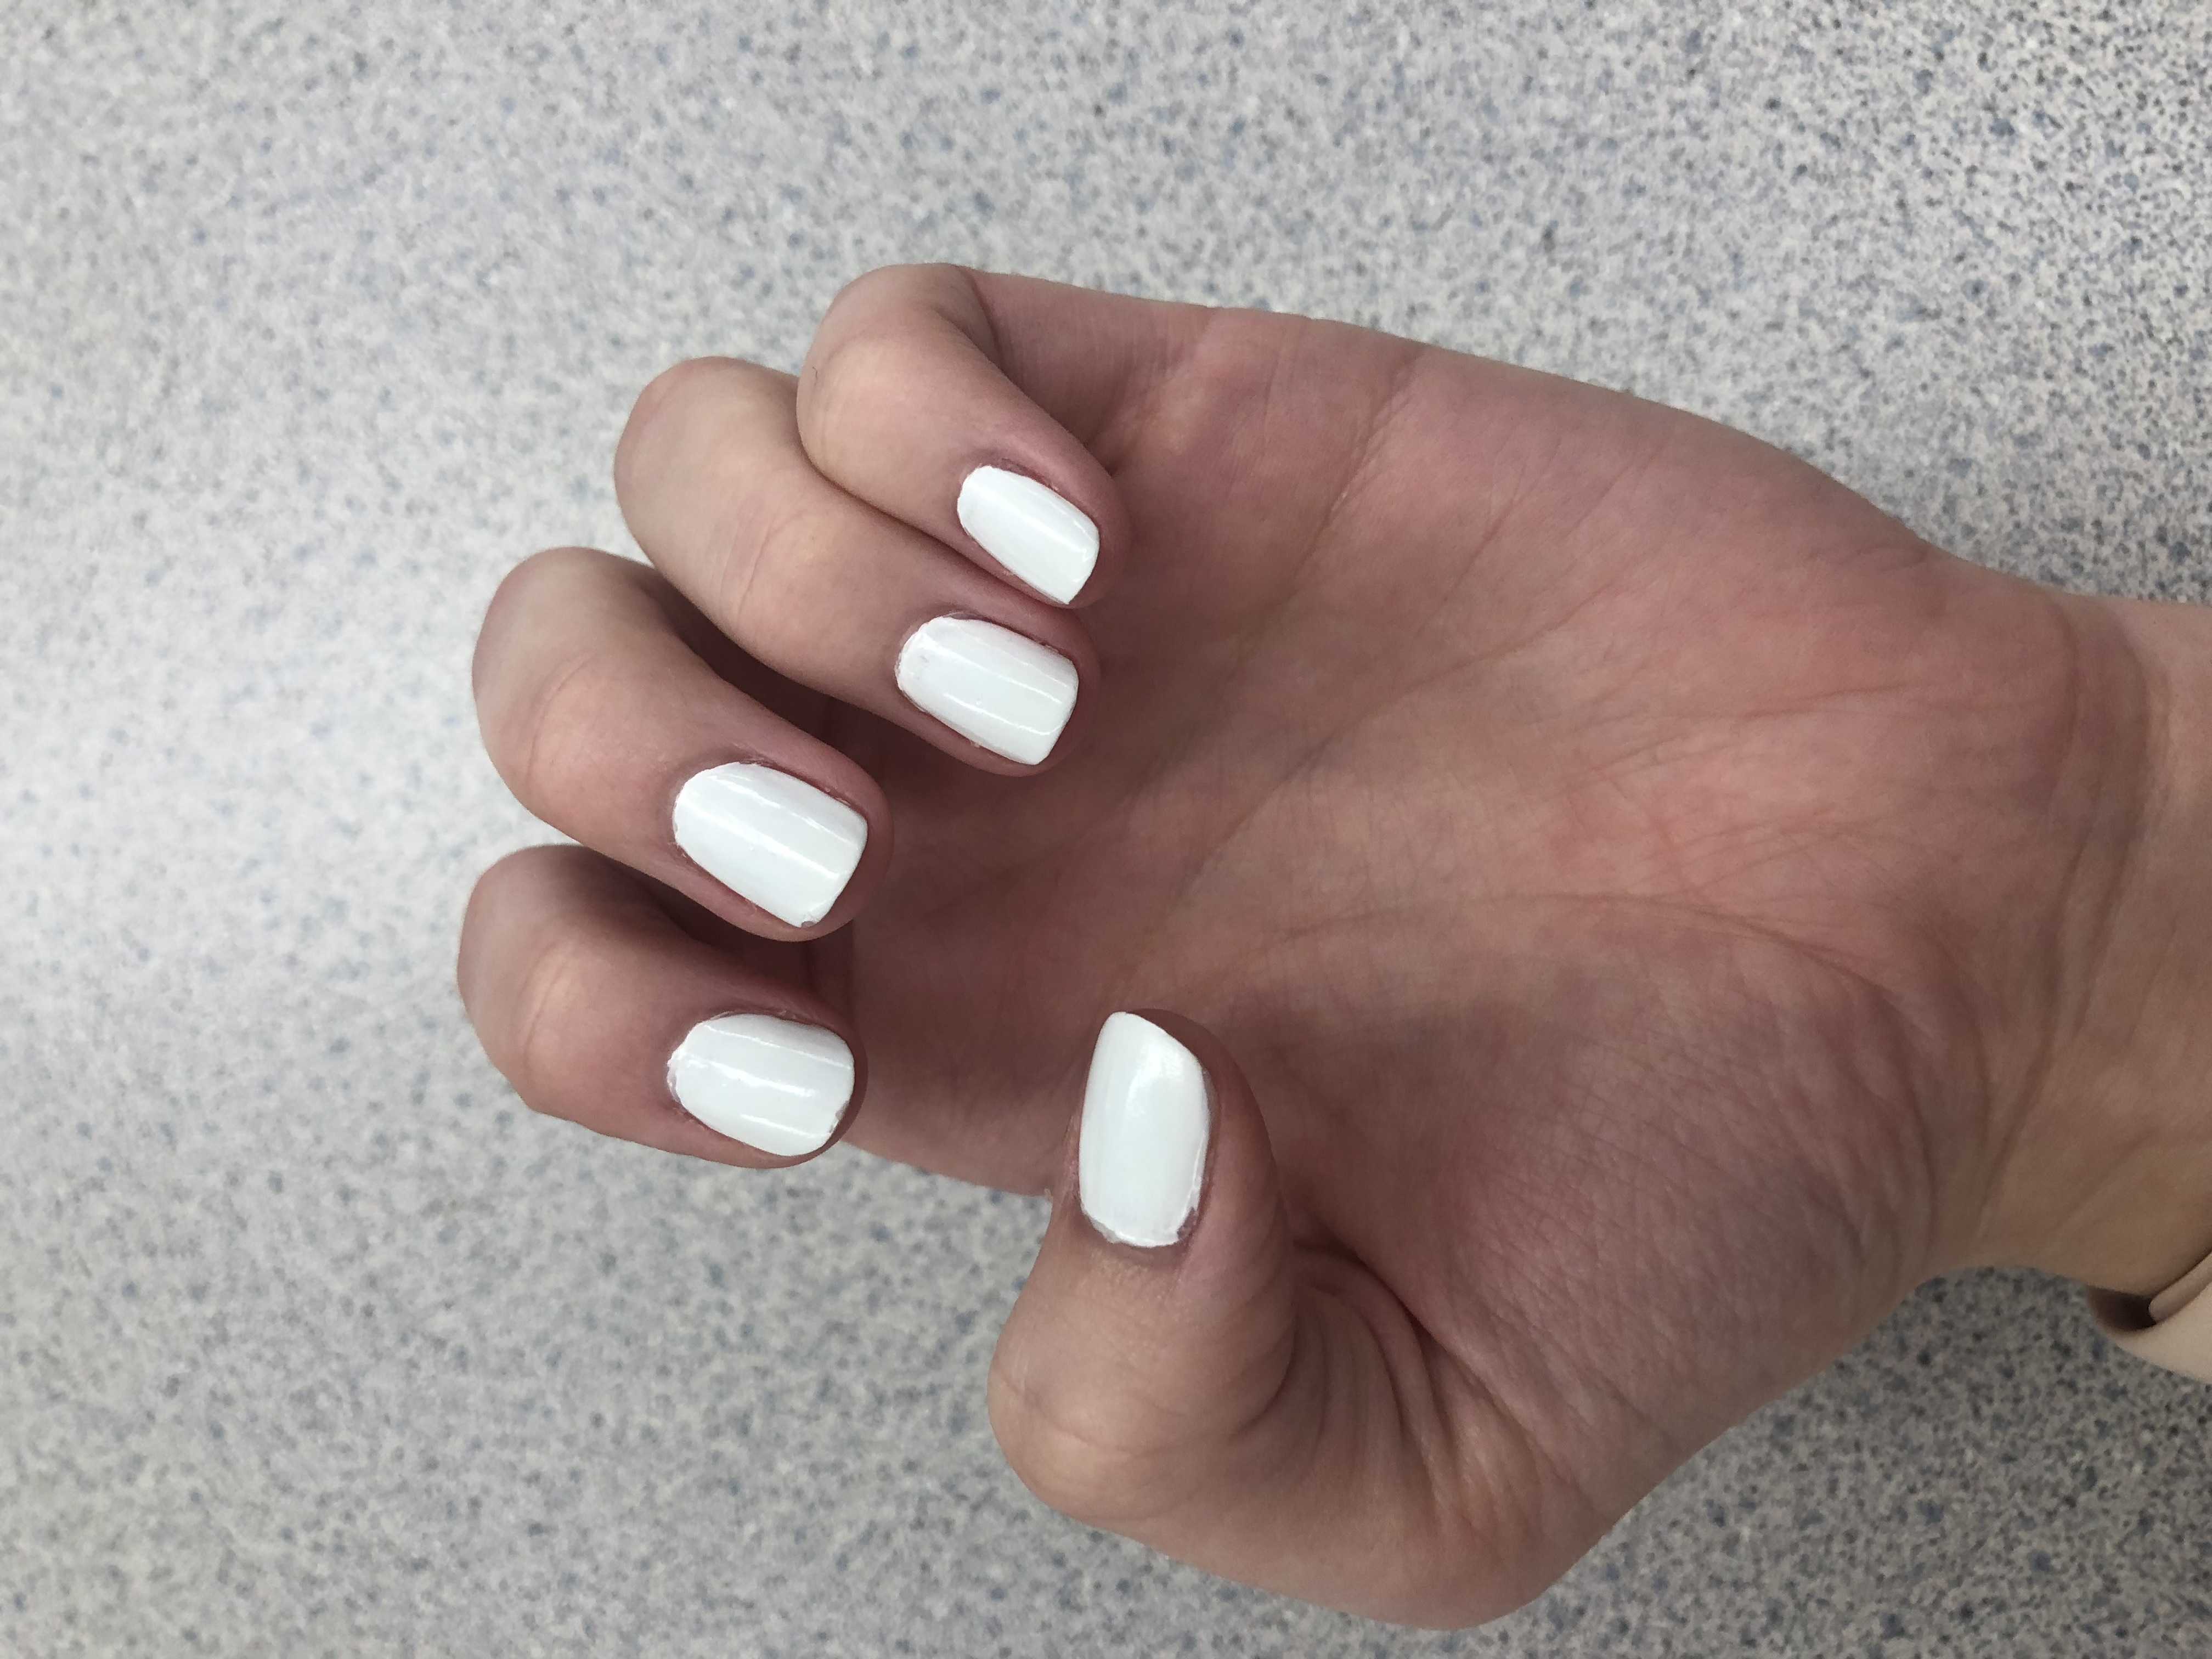 Nail Appointment at School? | The Student Prints